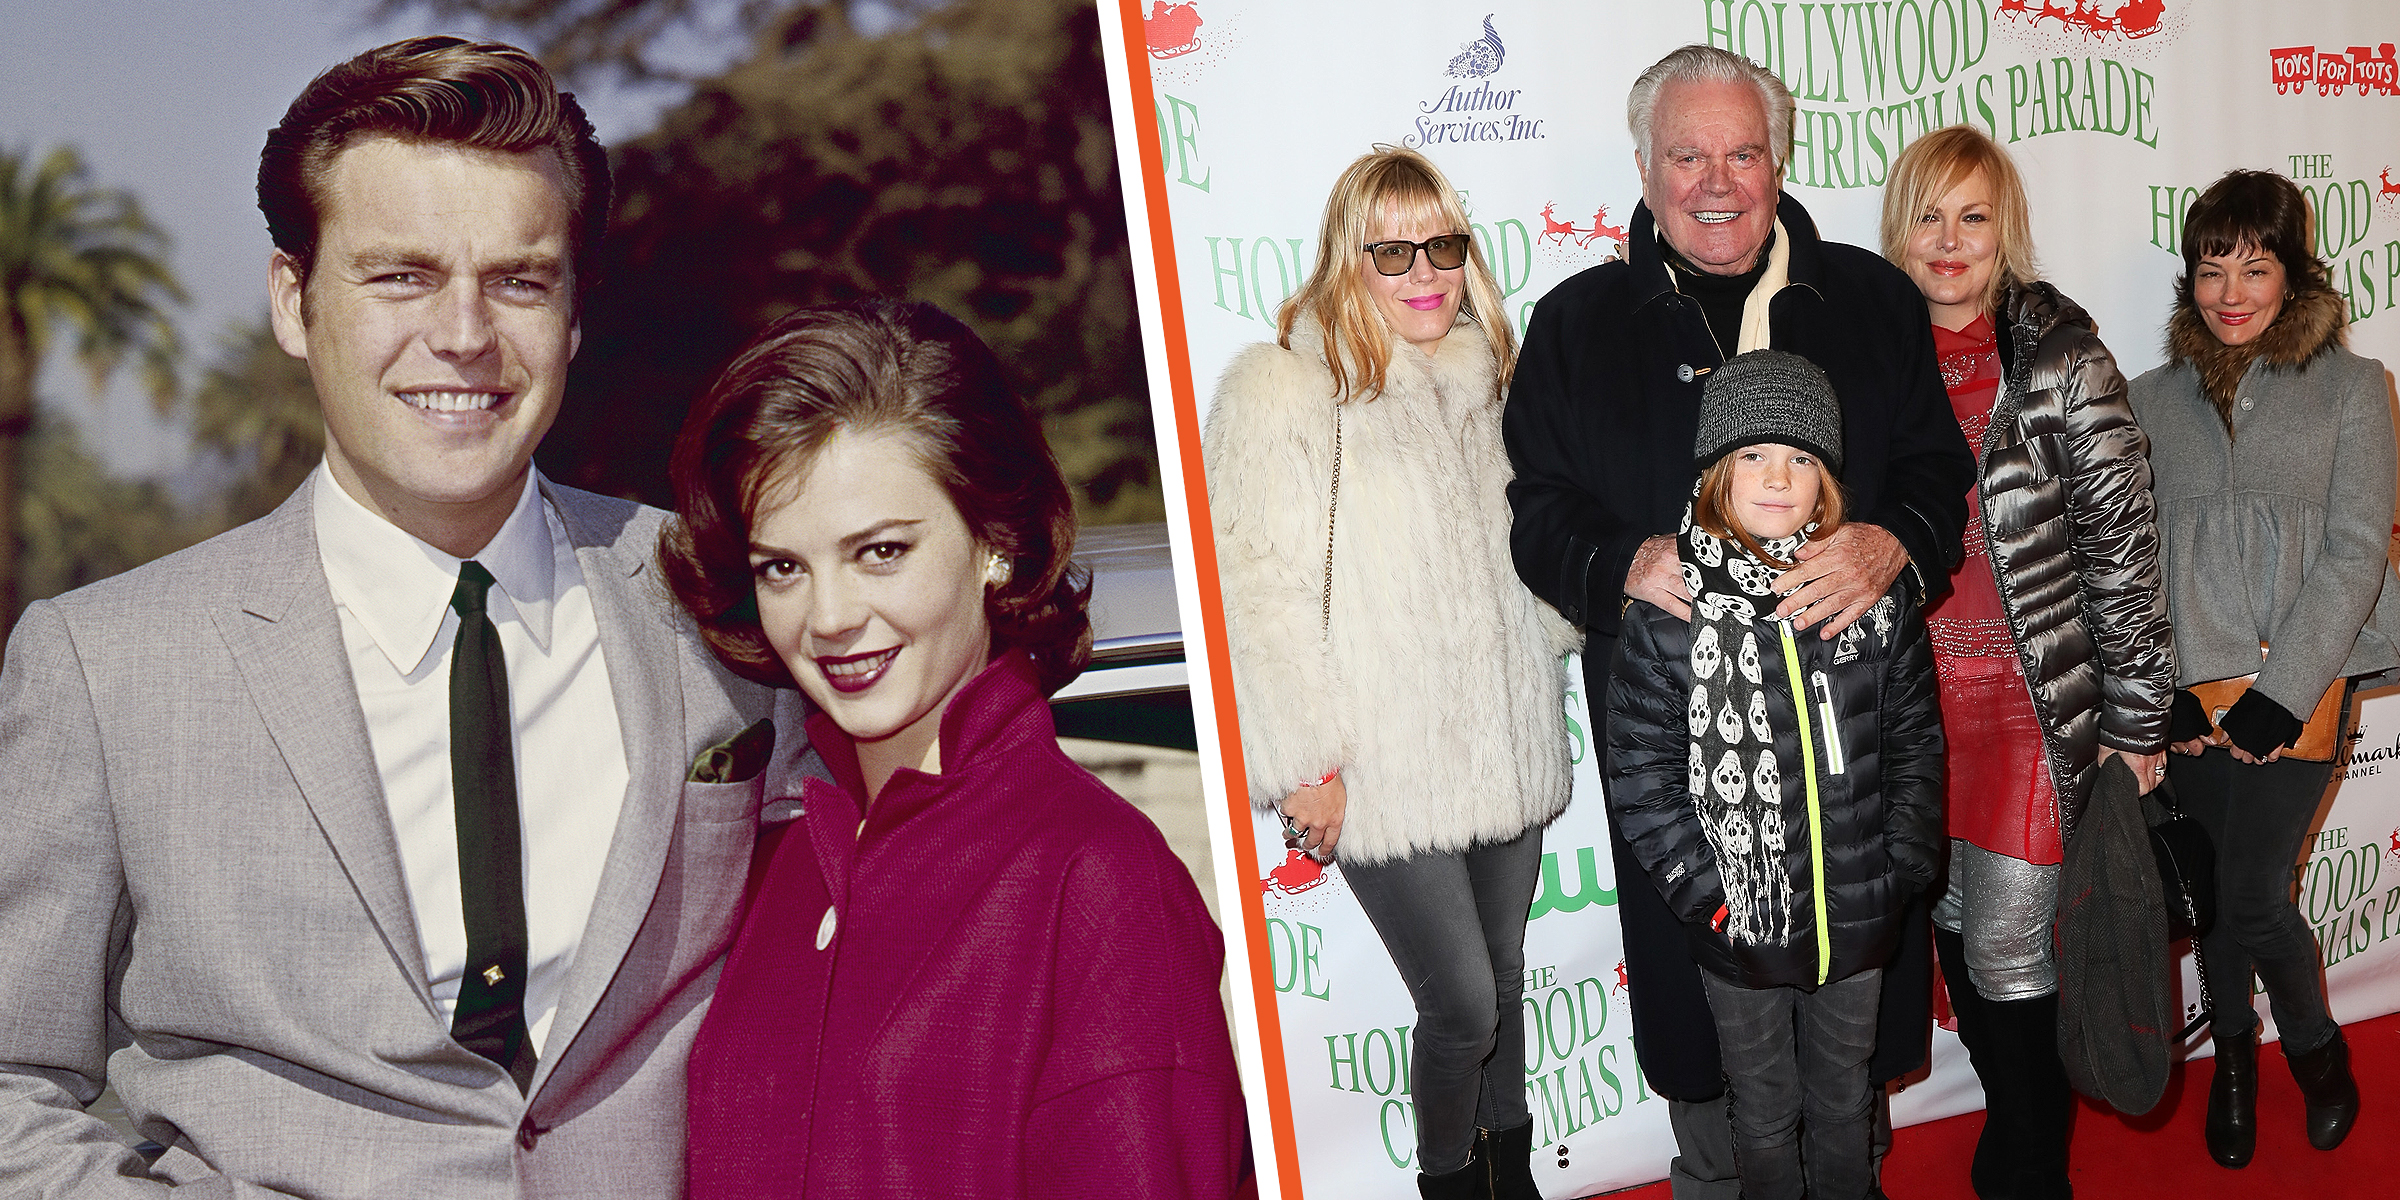 Robert Wagner and Natalie Wood, circa 1960. | Robert Wagner with his kids arrive at the 85th Annual Hollywood Christmas Parade in 2016. | Source: Getty Images